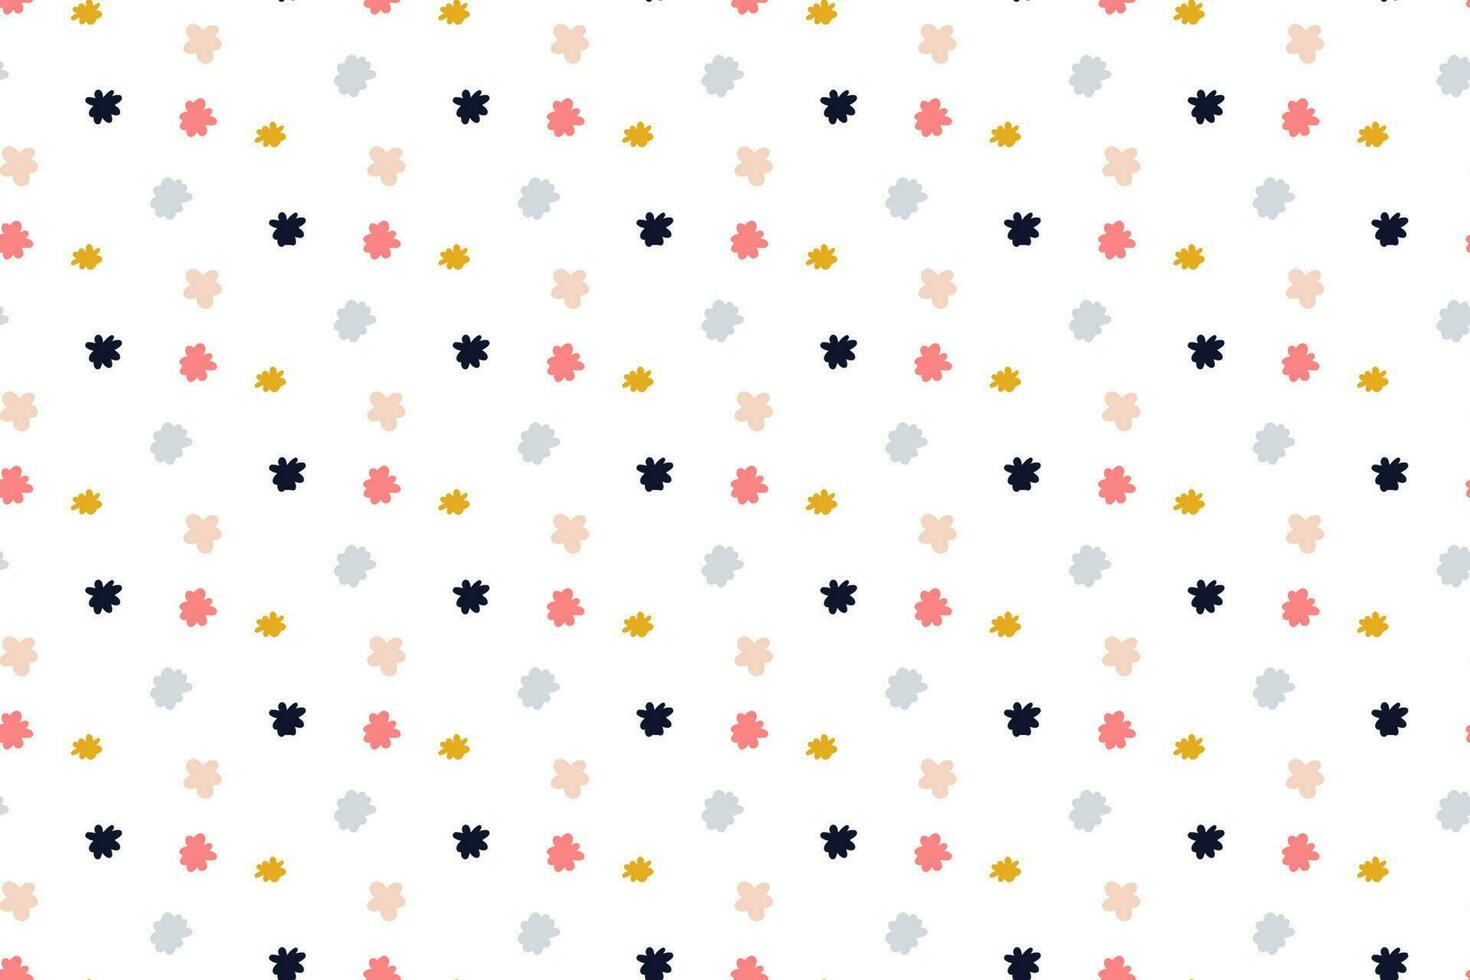 Retro groovy flower power background. Vintage 1970s floral seamless pattern. Hippie fun wallpaper. 1960s vector print for fabric, wrapping paper, stationery